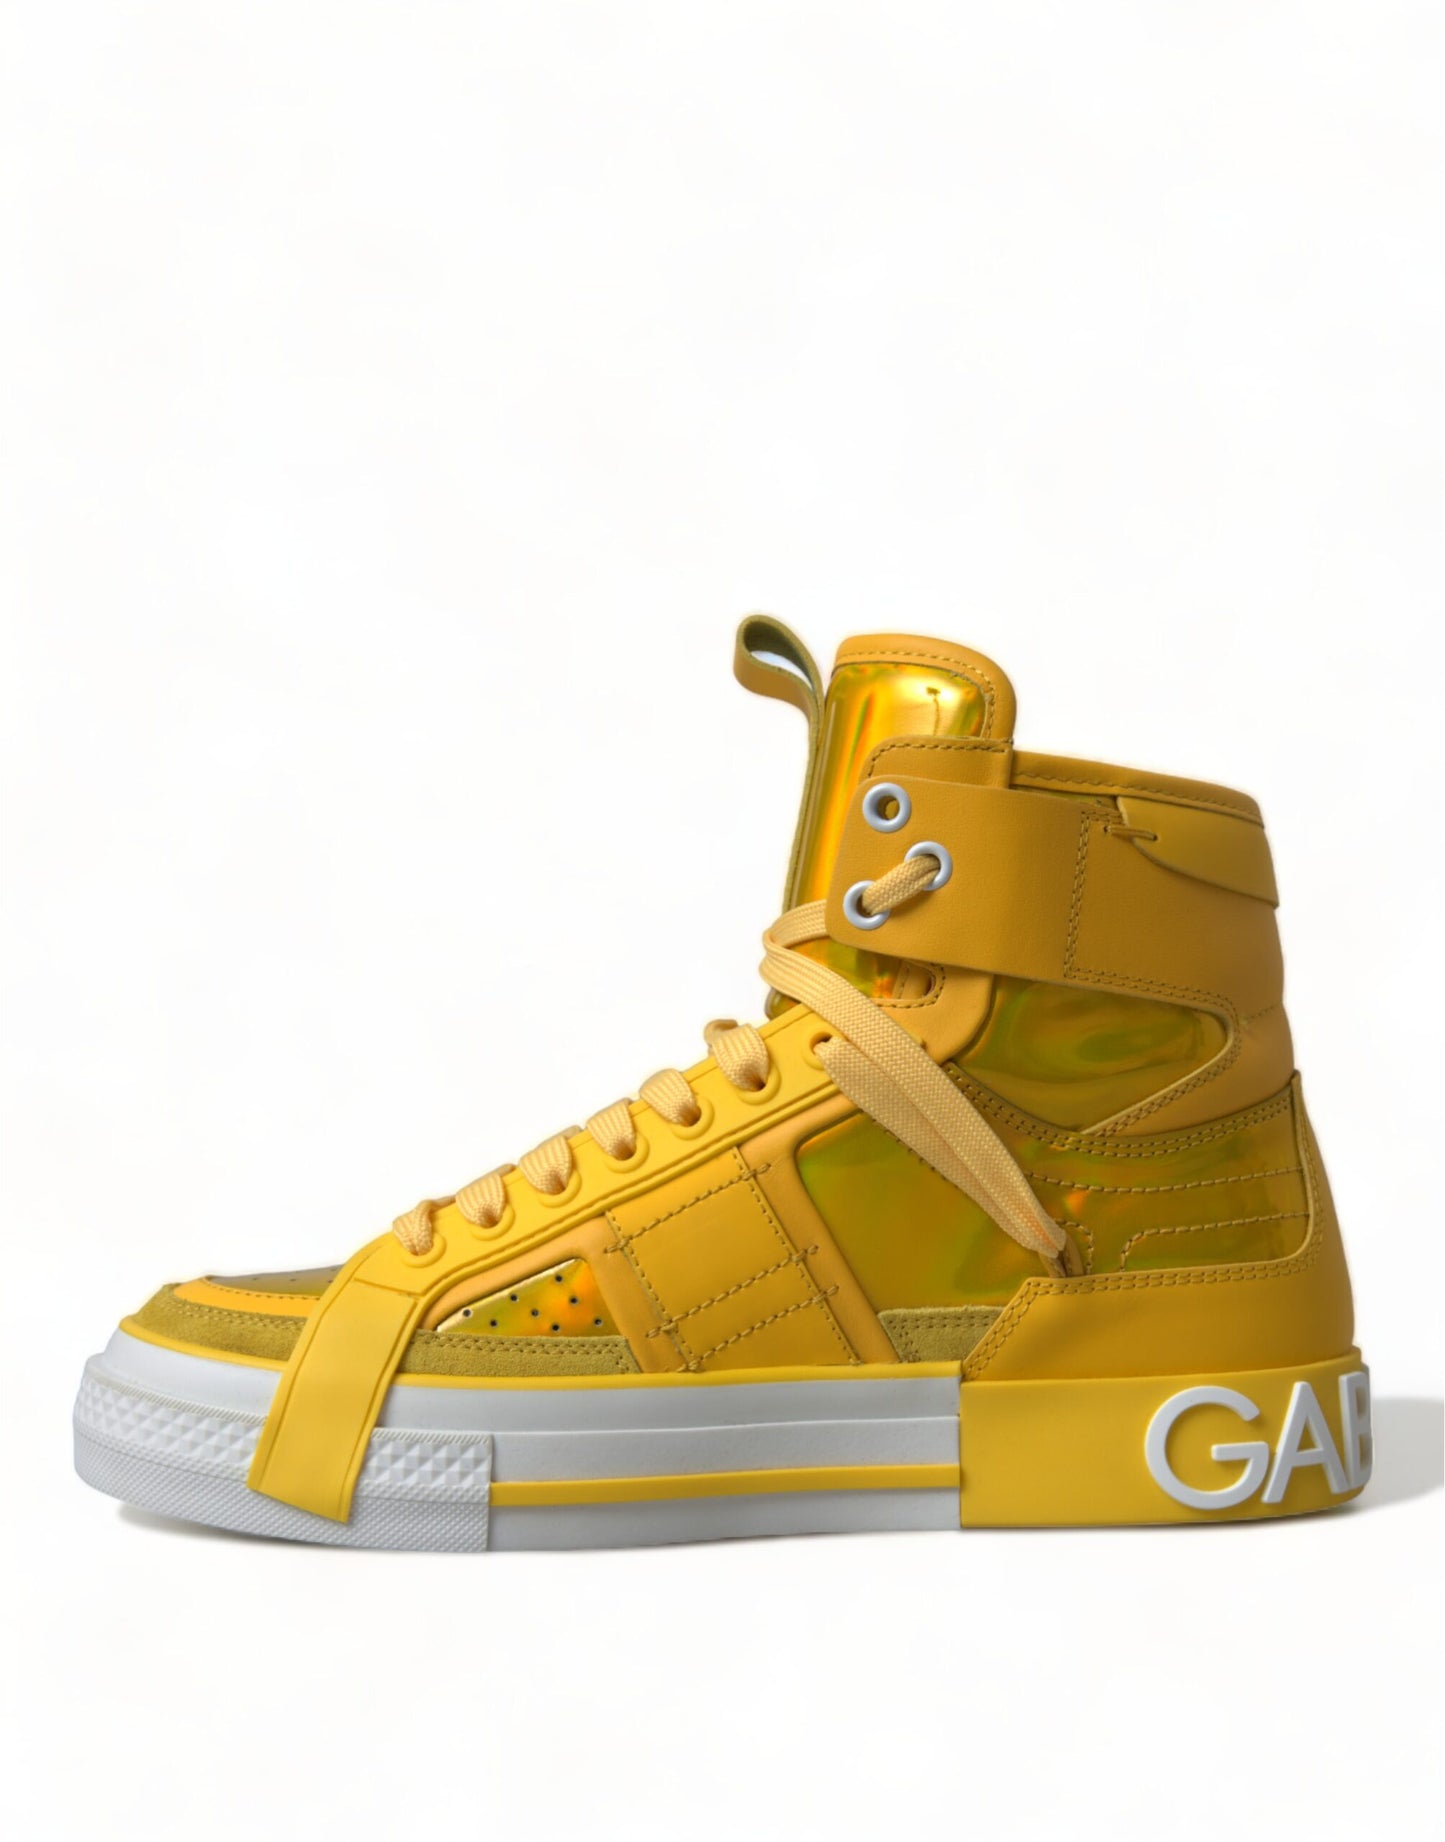 Dolce & Gabbana Chic High-Top Color-Block Sneakers